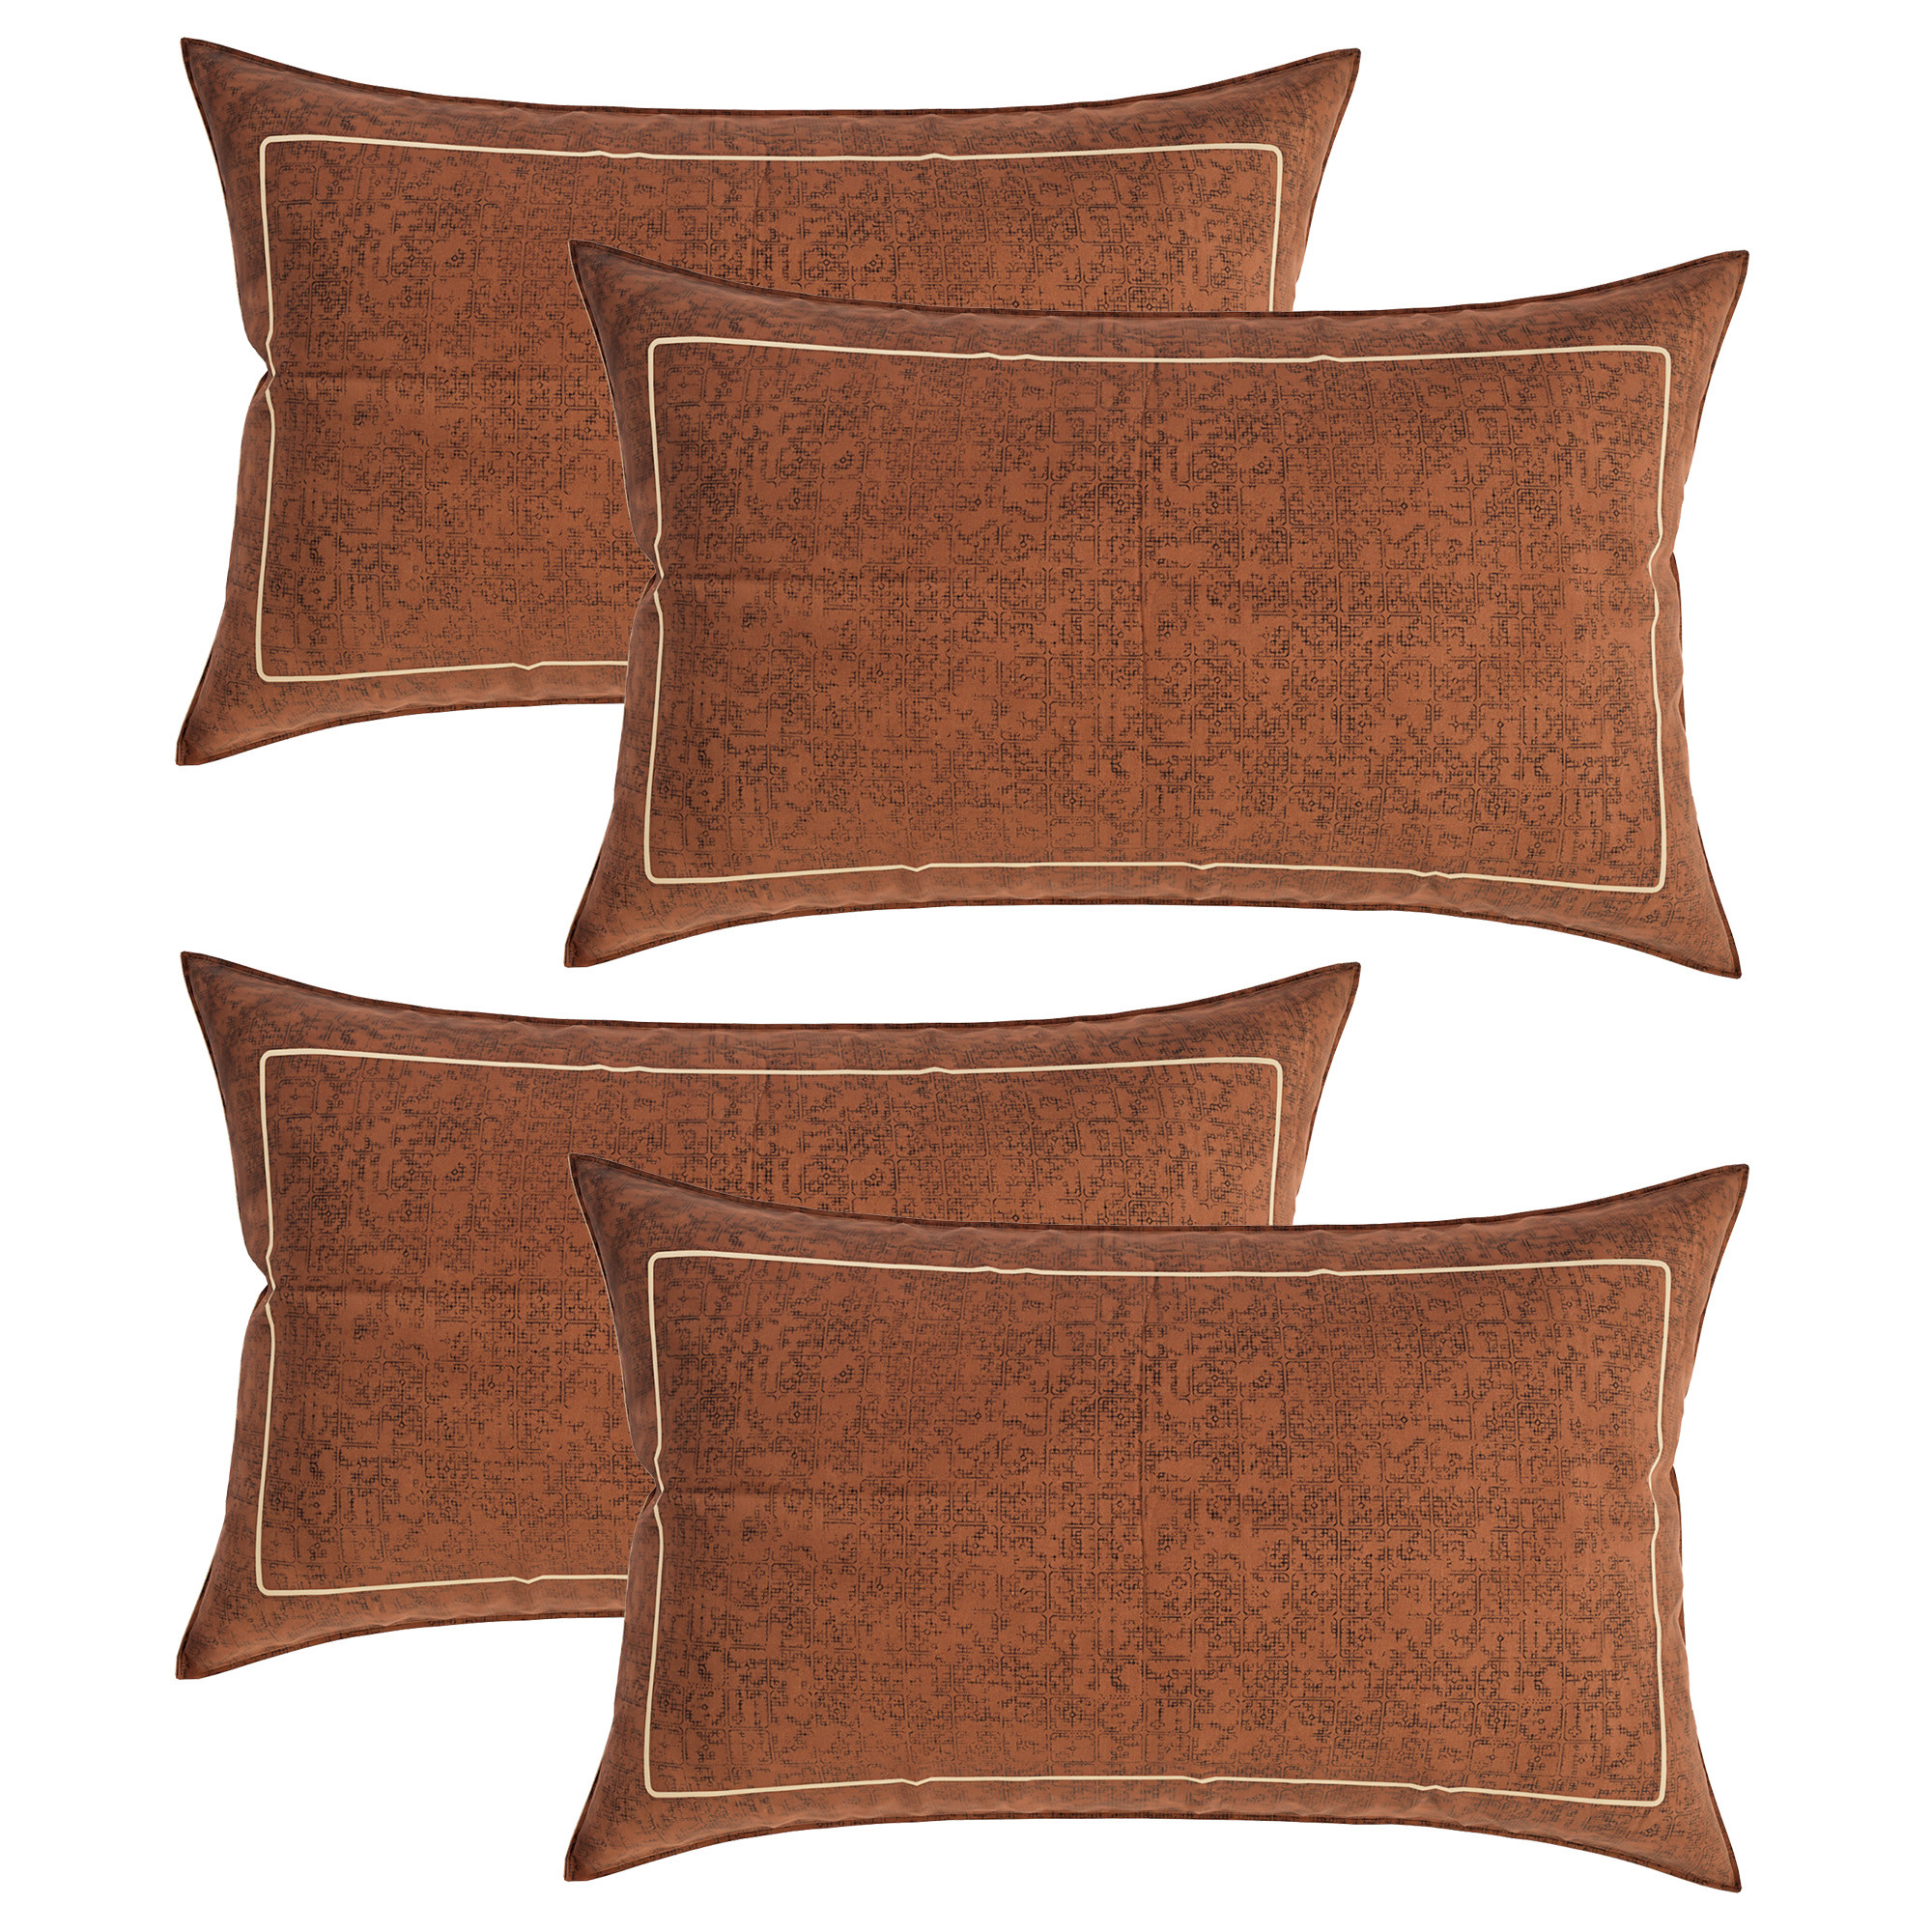 Kuber Industries Pillow Cover | Cotton Pillow Cover | Pillow Cover for Bedroom | Cushion Pillow Cover for Living Room | Khakhi Printed Pillow Cover Set |Brown